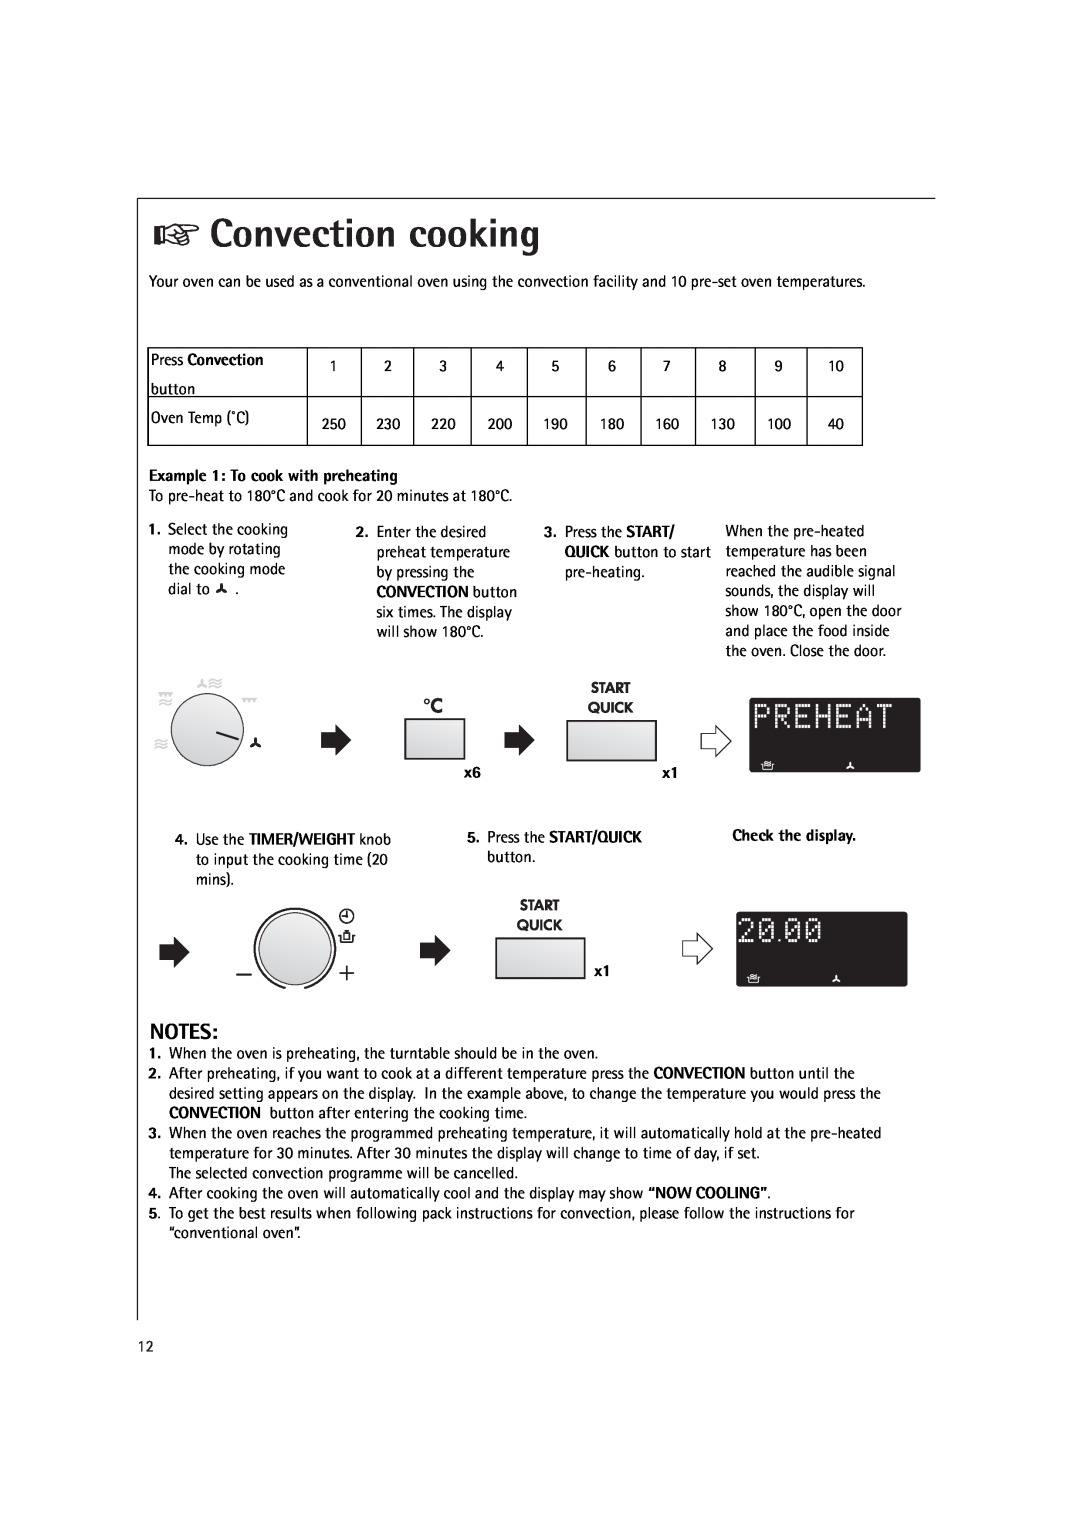 Electrolux MCC4060E operating instructions Convection cooking, Press Convection, Example 1 To cook with preheating, button 